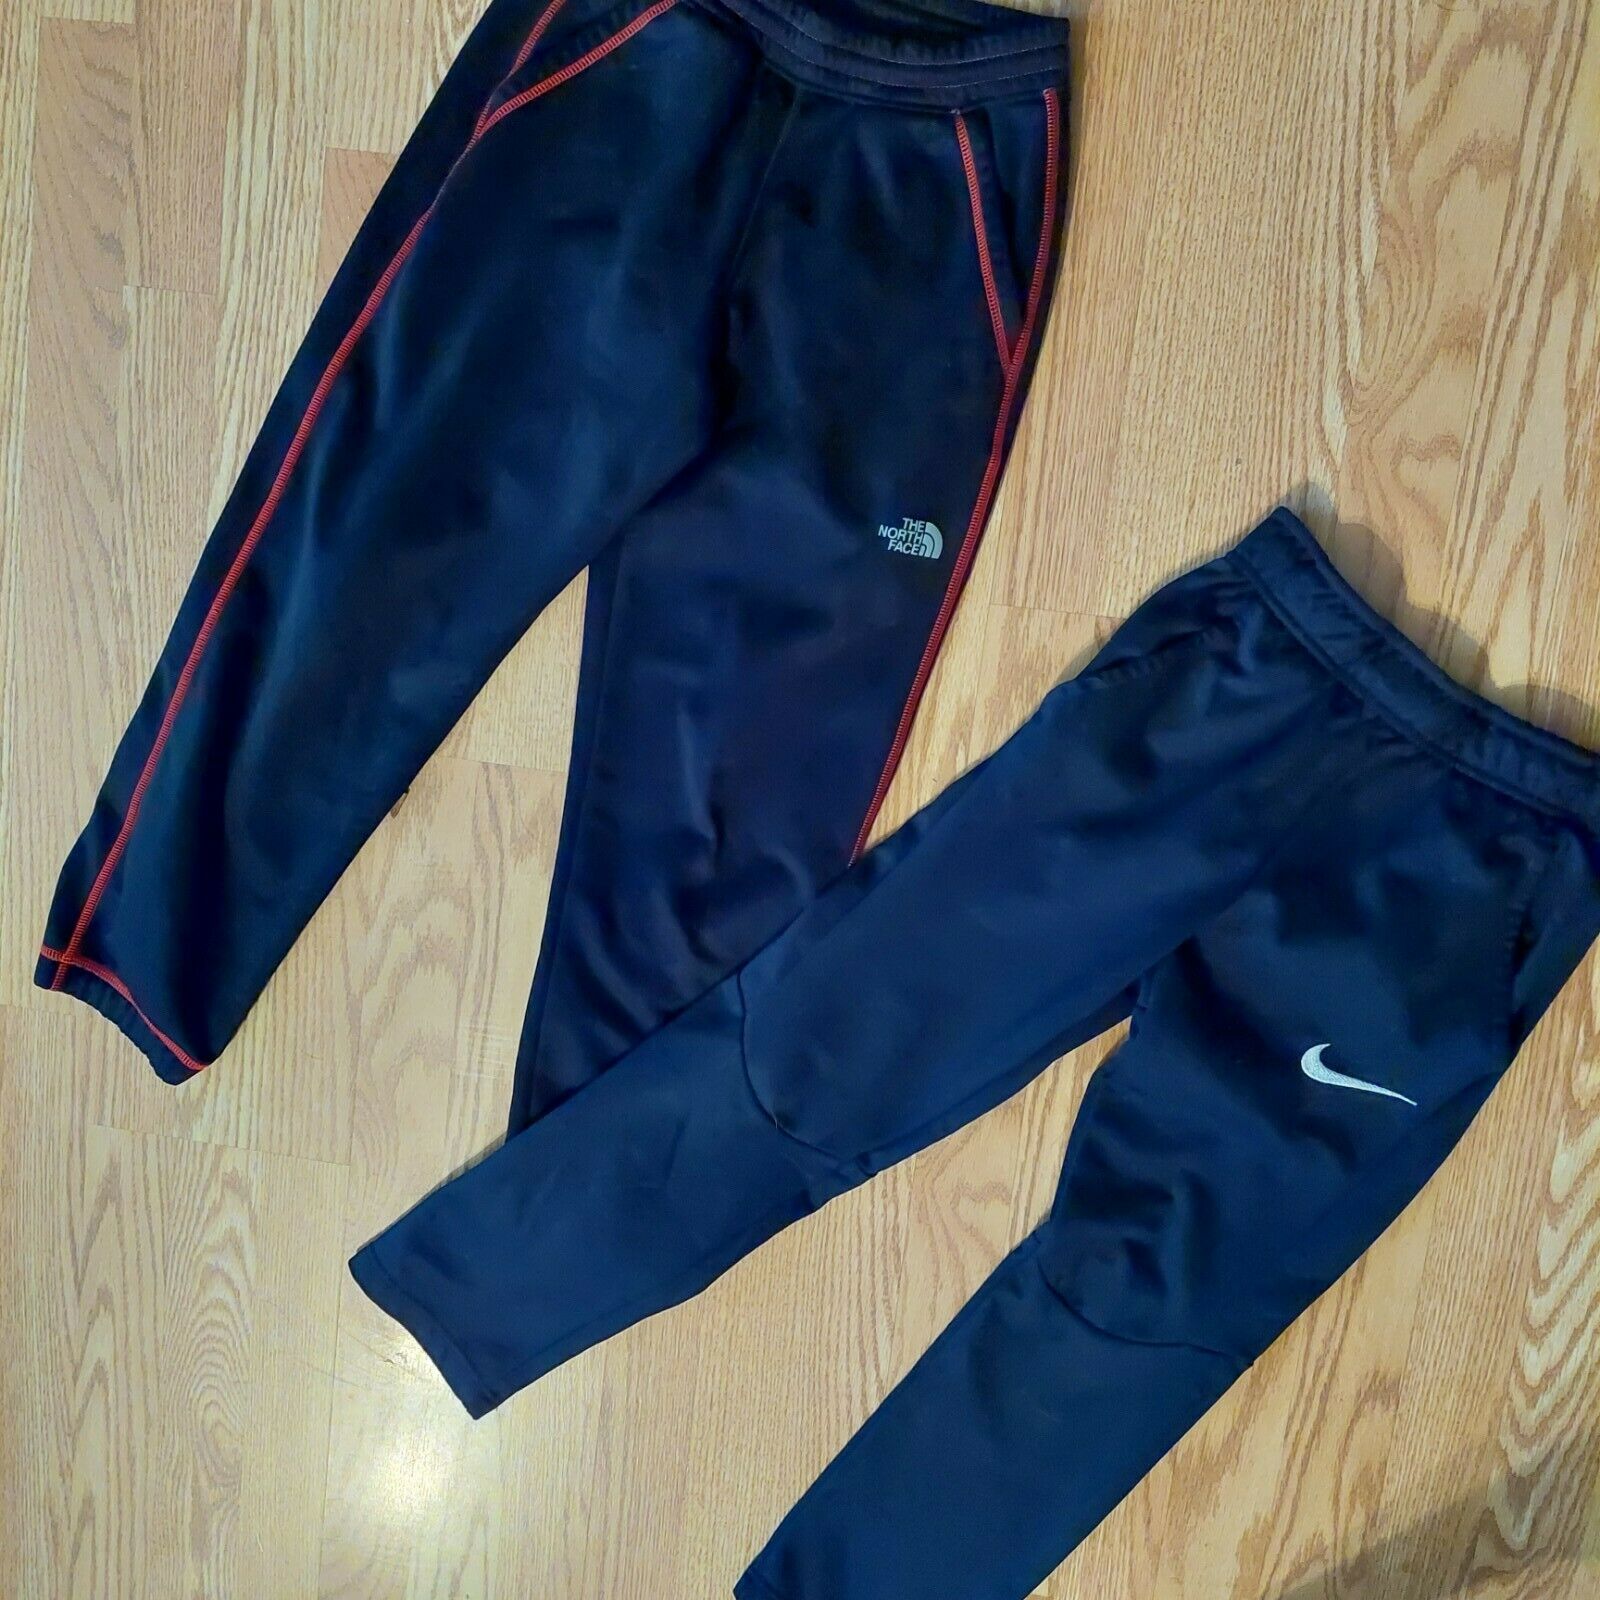 Boy's Size M  (12) Sweatpants The North Face & Nike (lot Of 2) Black Polyester